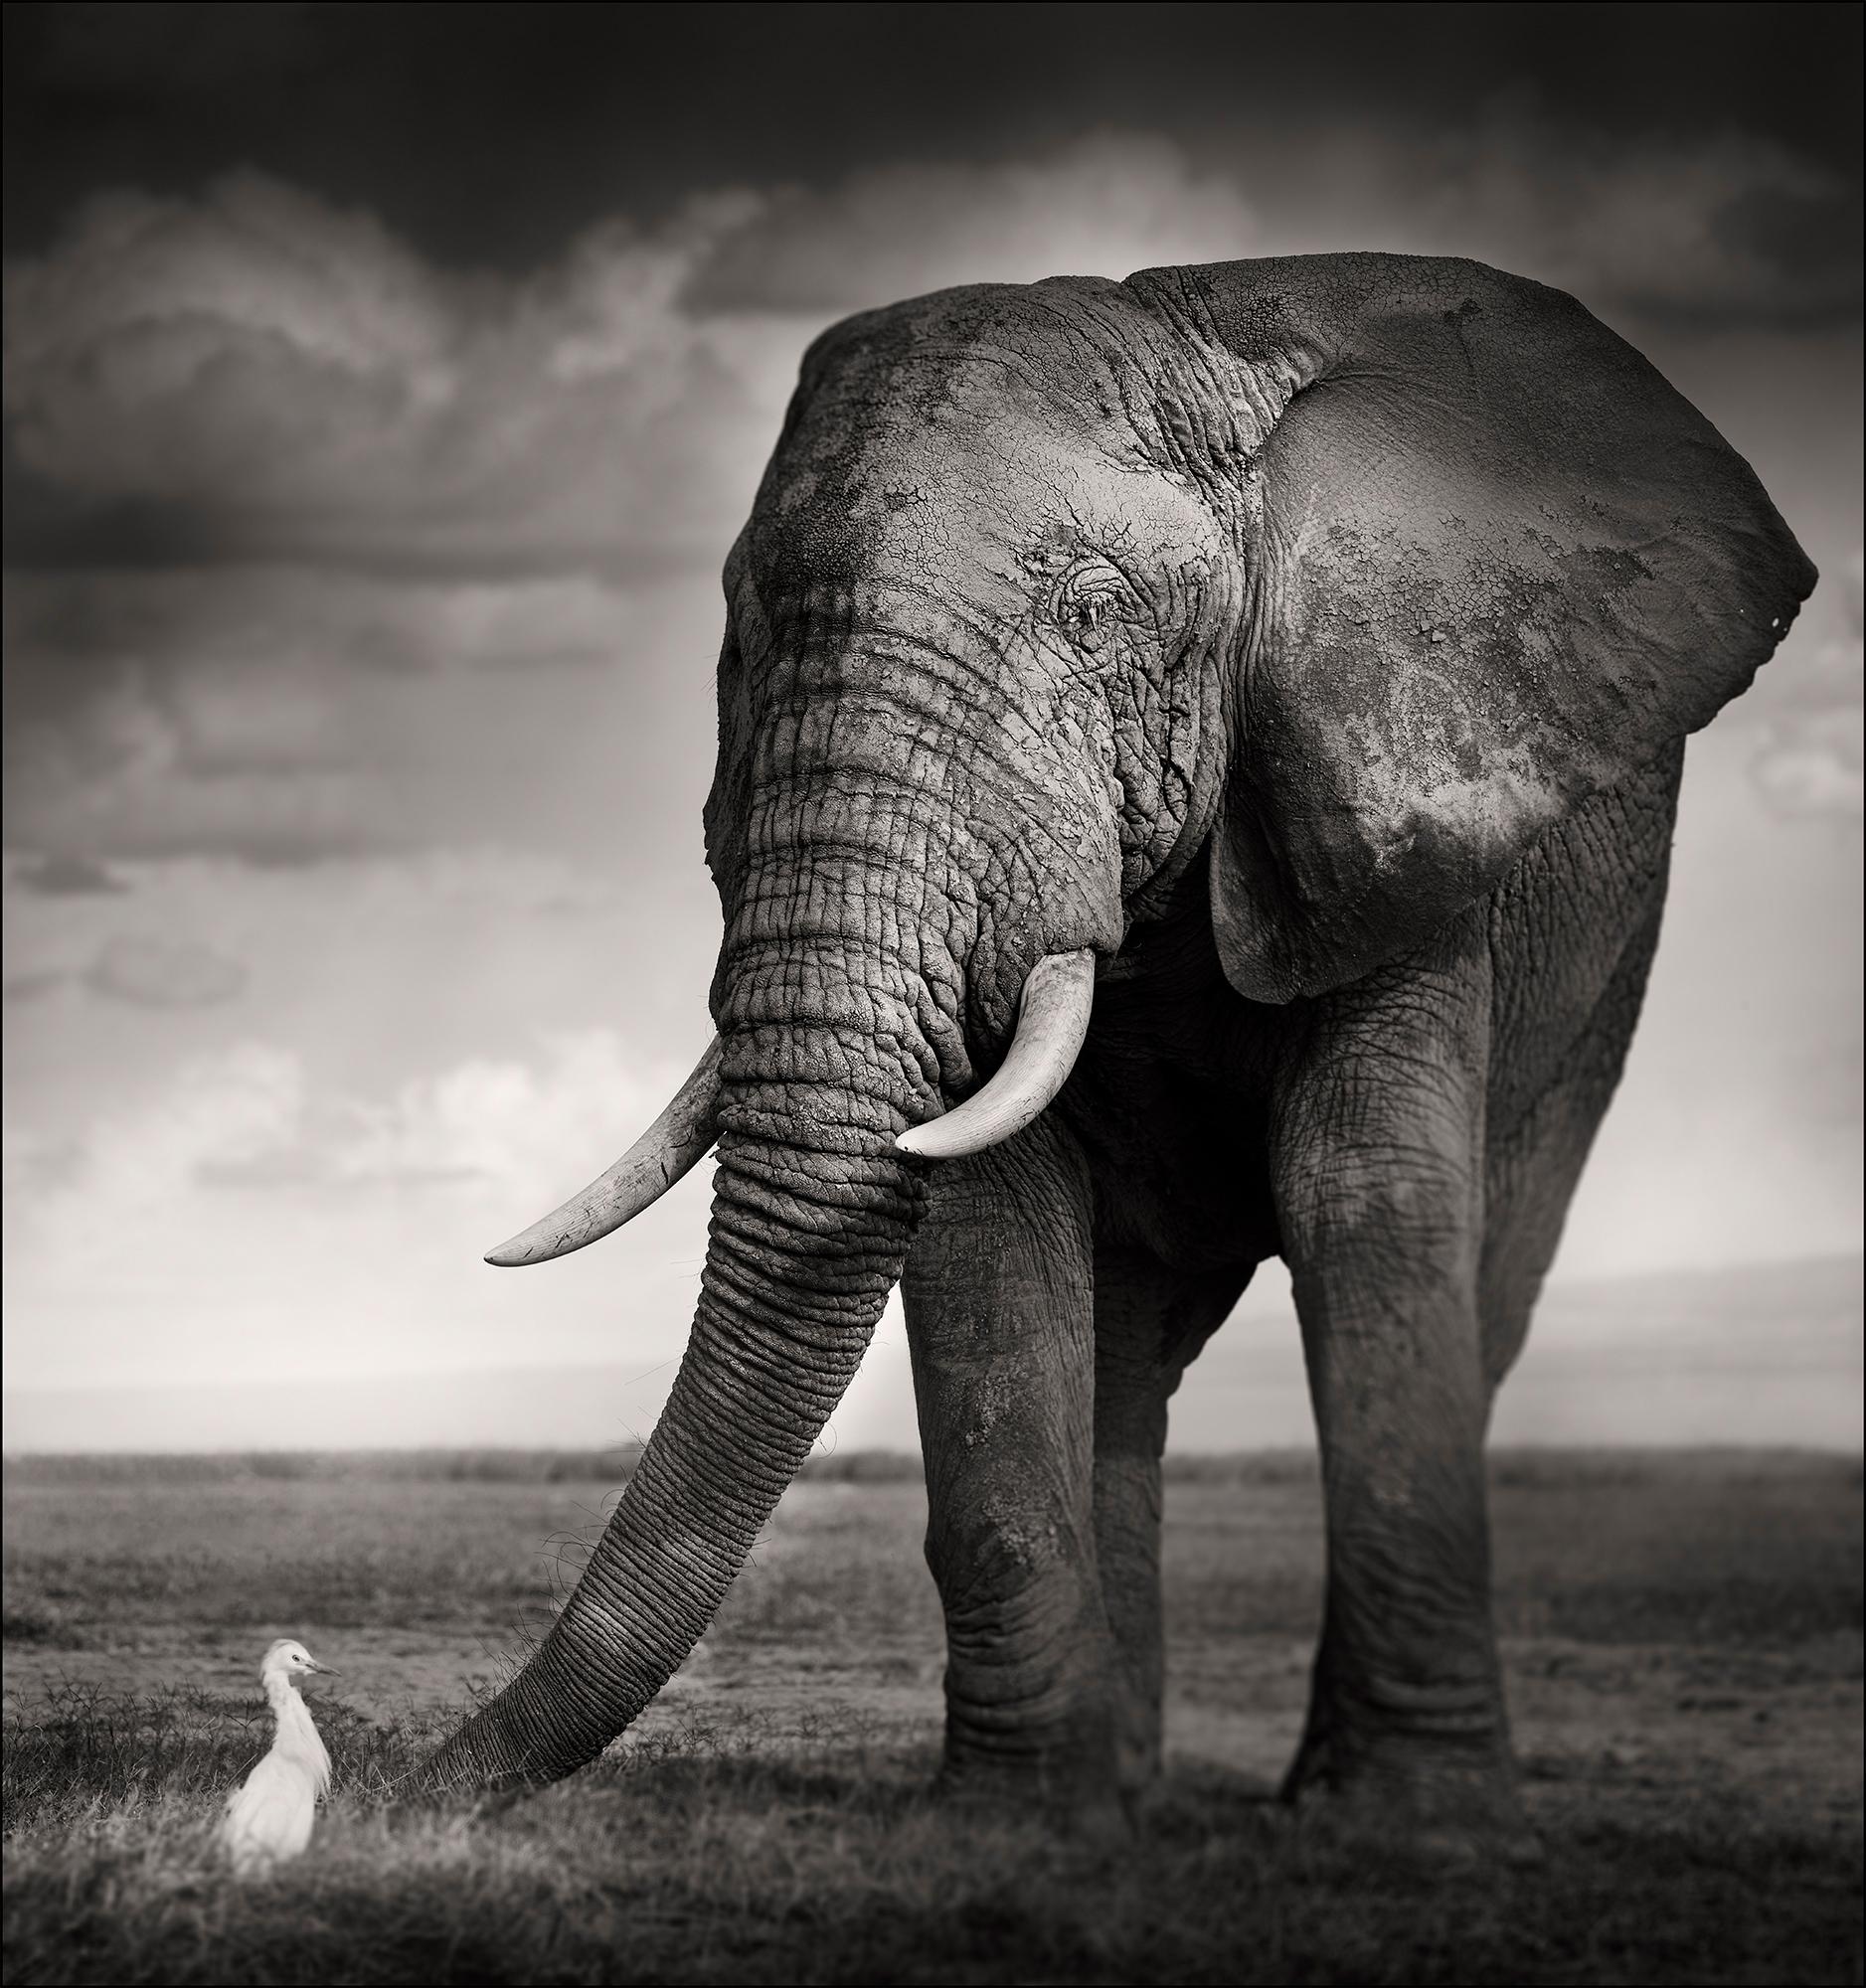 Joachim Schmeisser Black and White Photograph - The Bull and the Bird, animal, wildlife, black and white photography, elephant